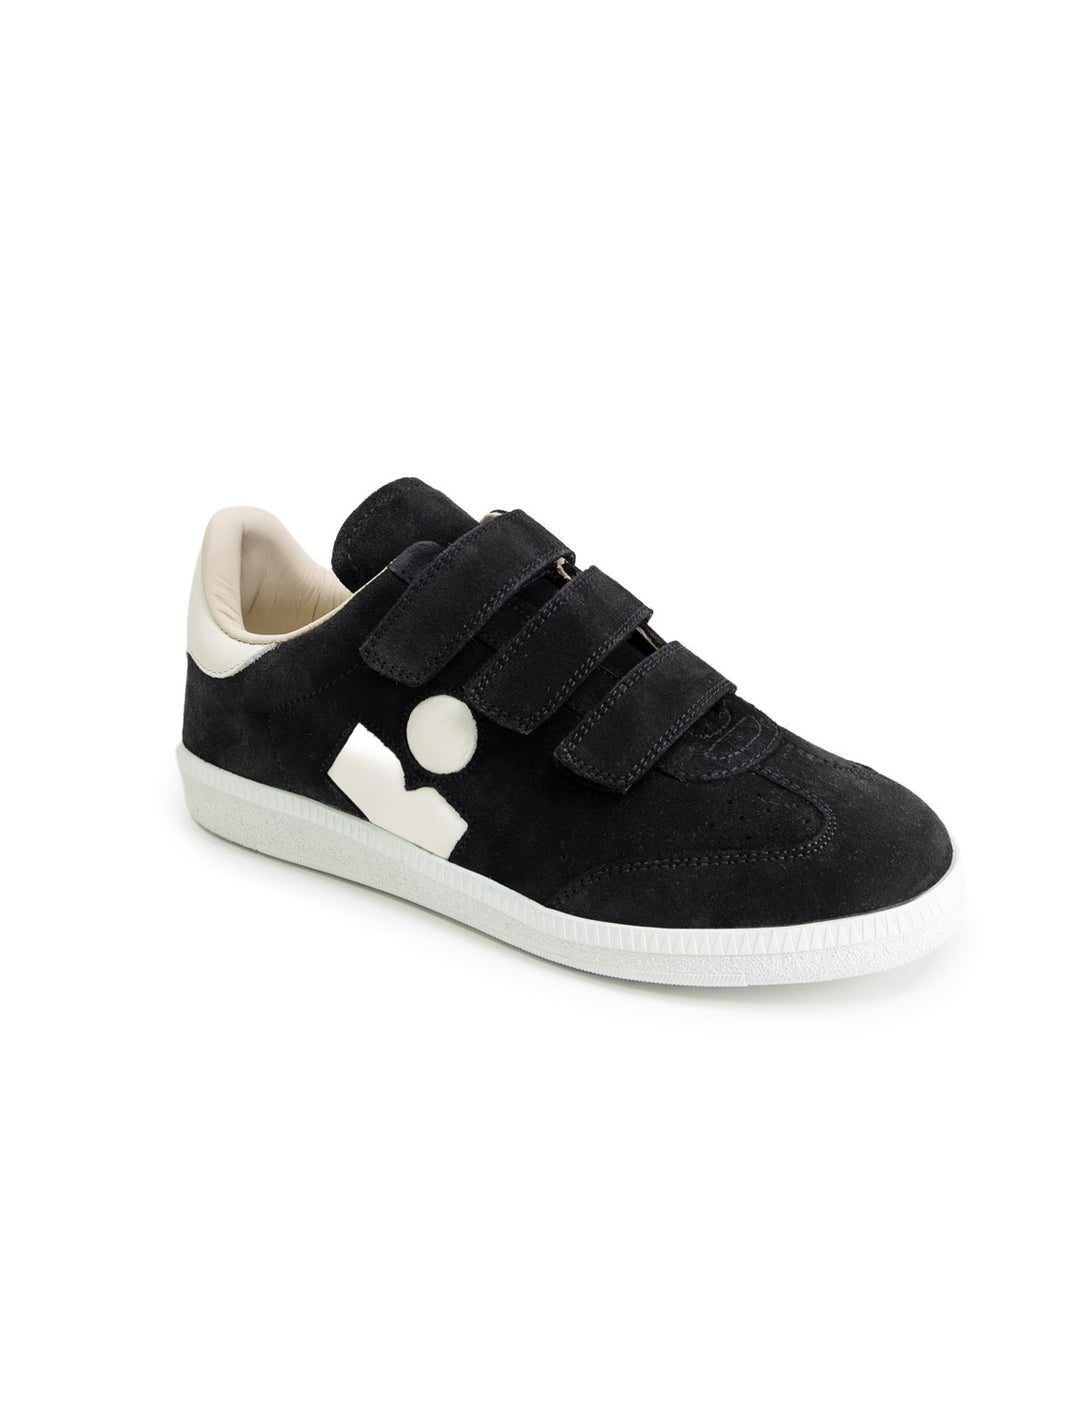 Front angle view of Isabel Marant Etoile's Beth Sneaker in Faded Black.